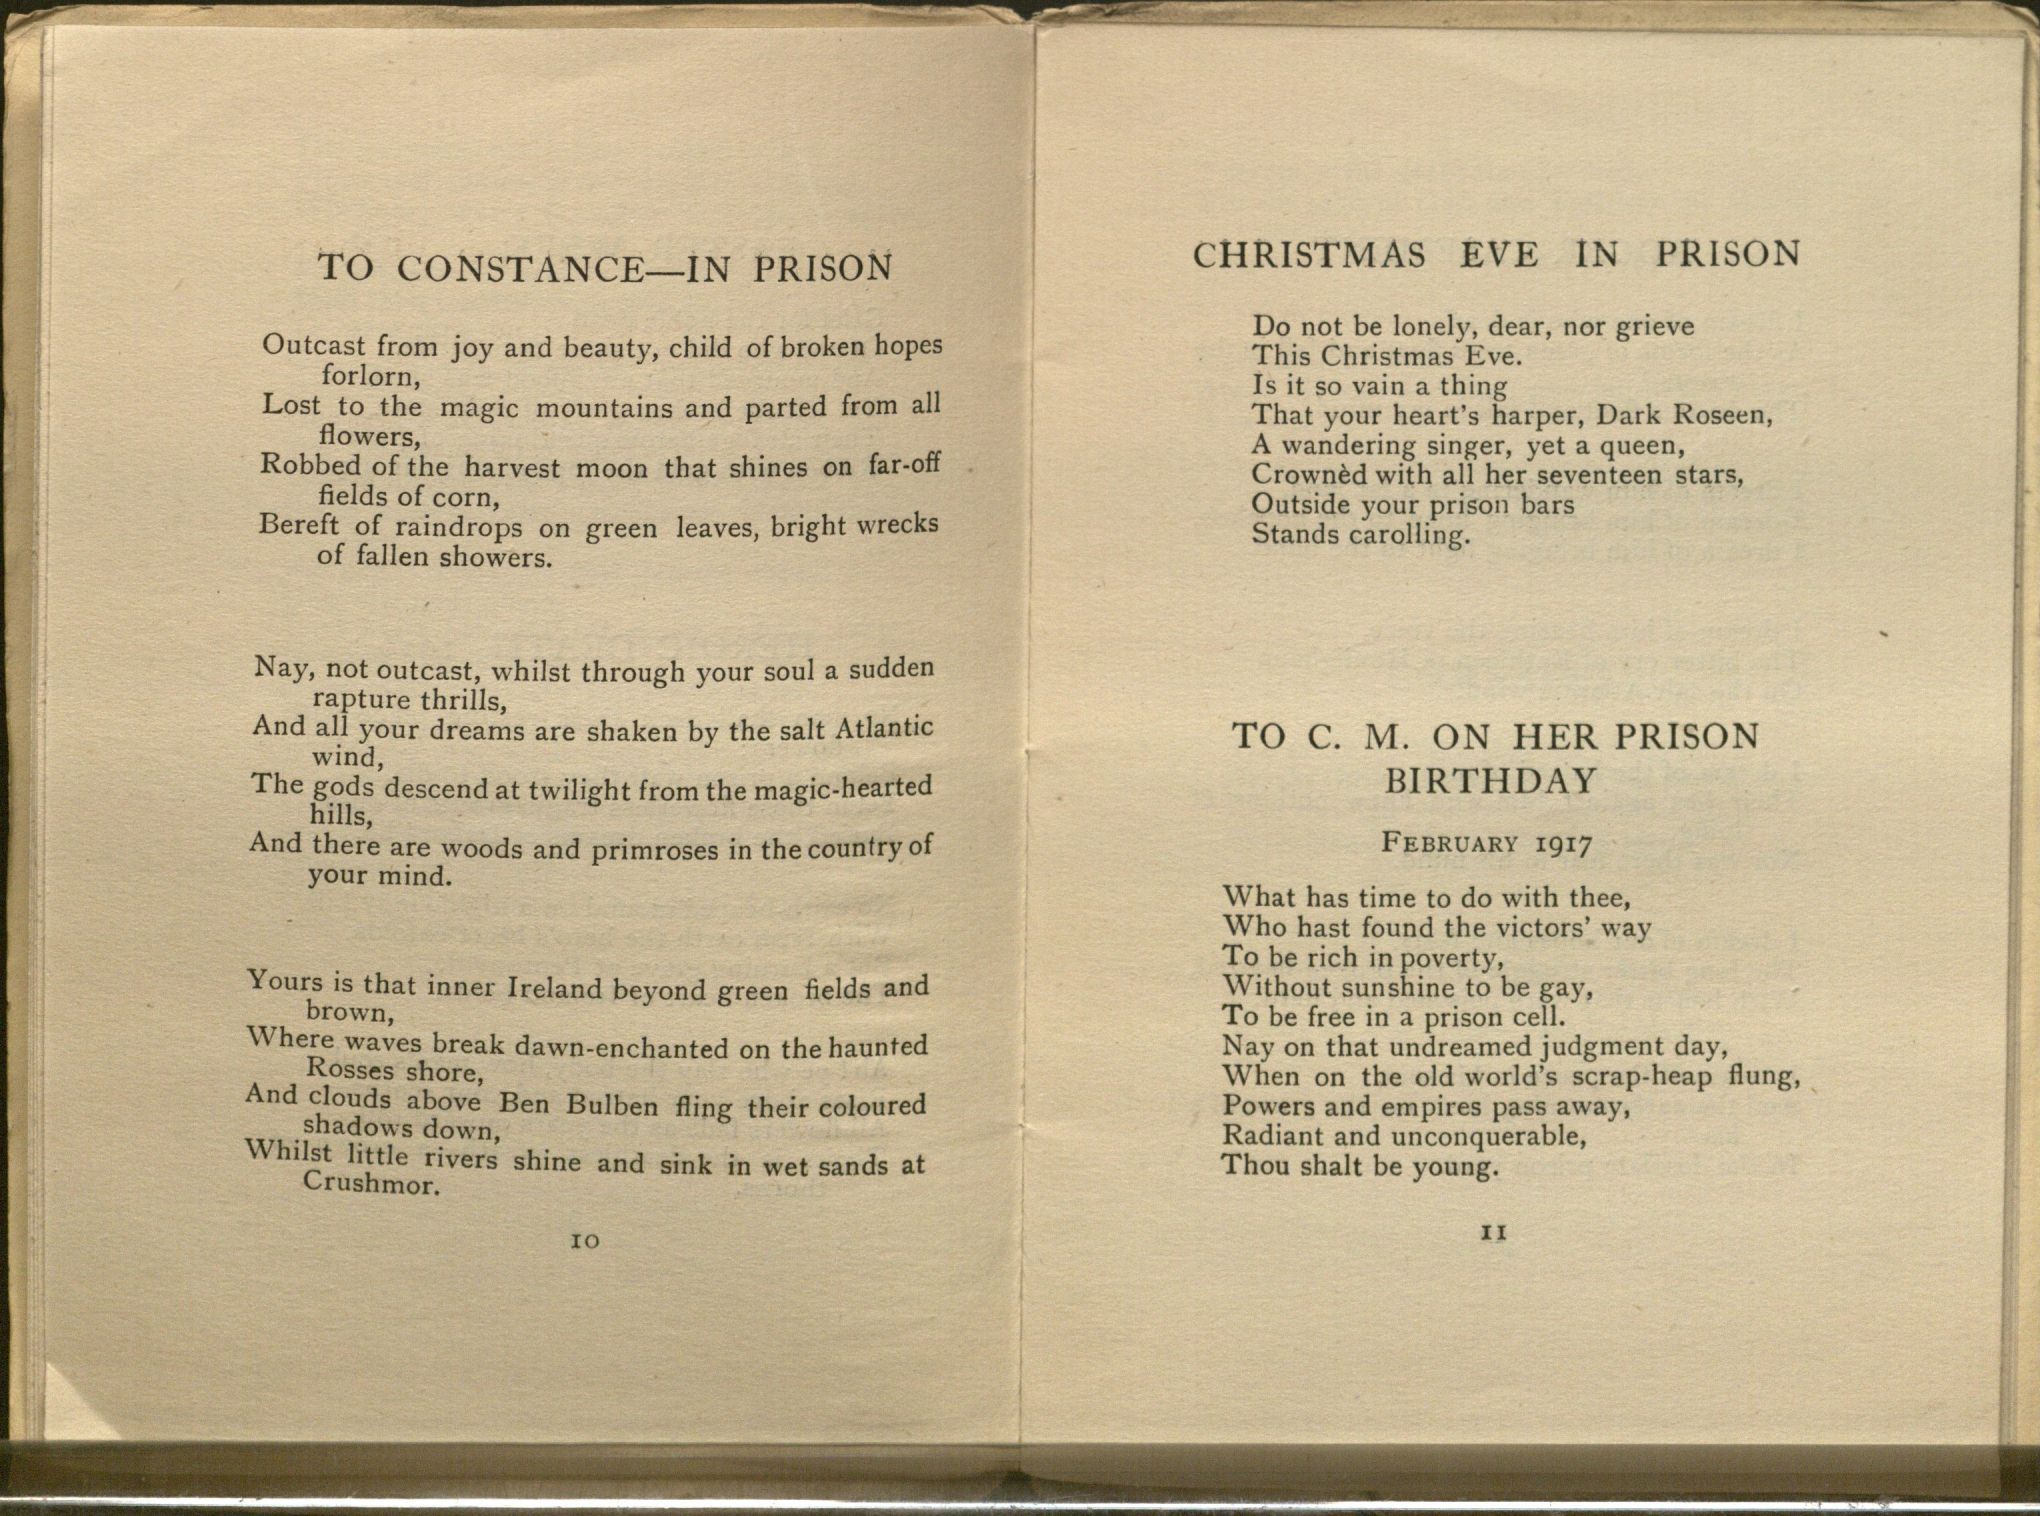 Image of Eva Gore-Booth's poem "To Constance--In Prison"